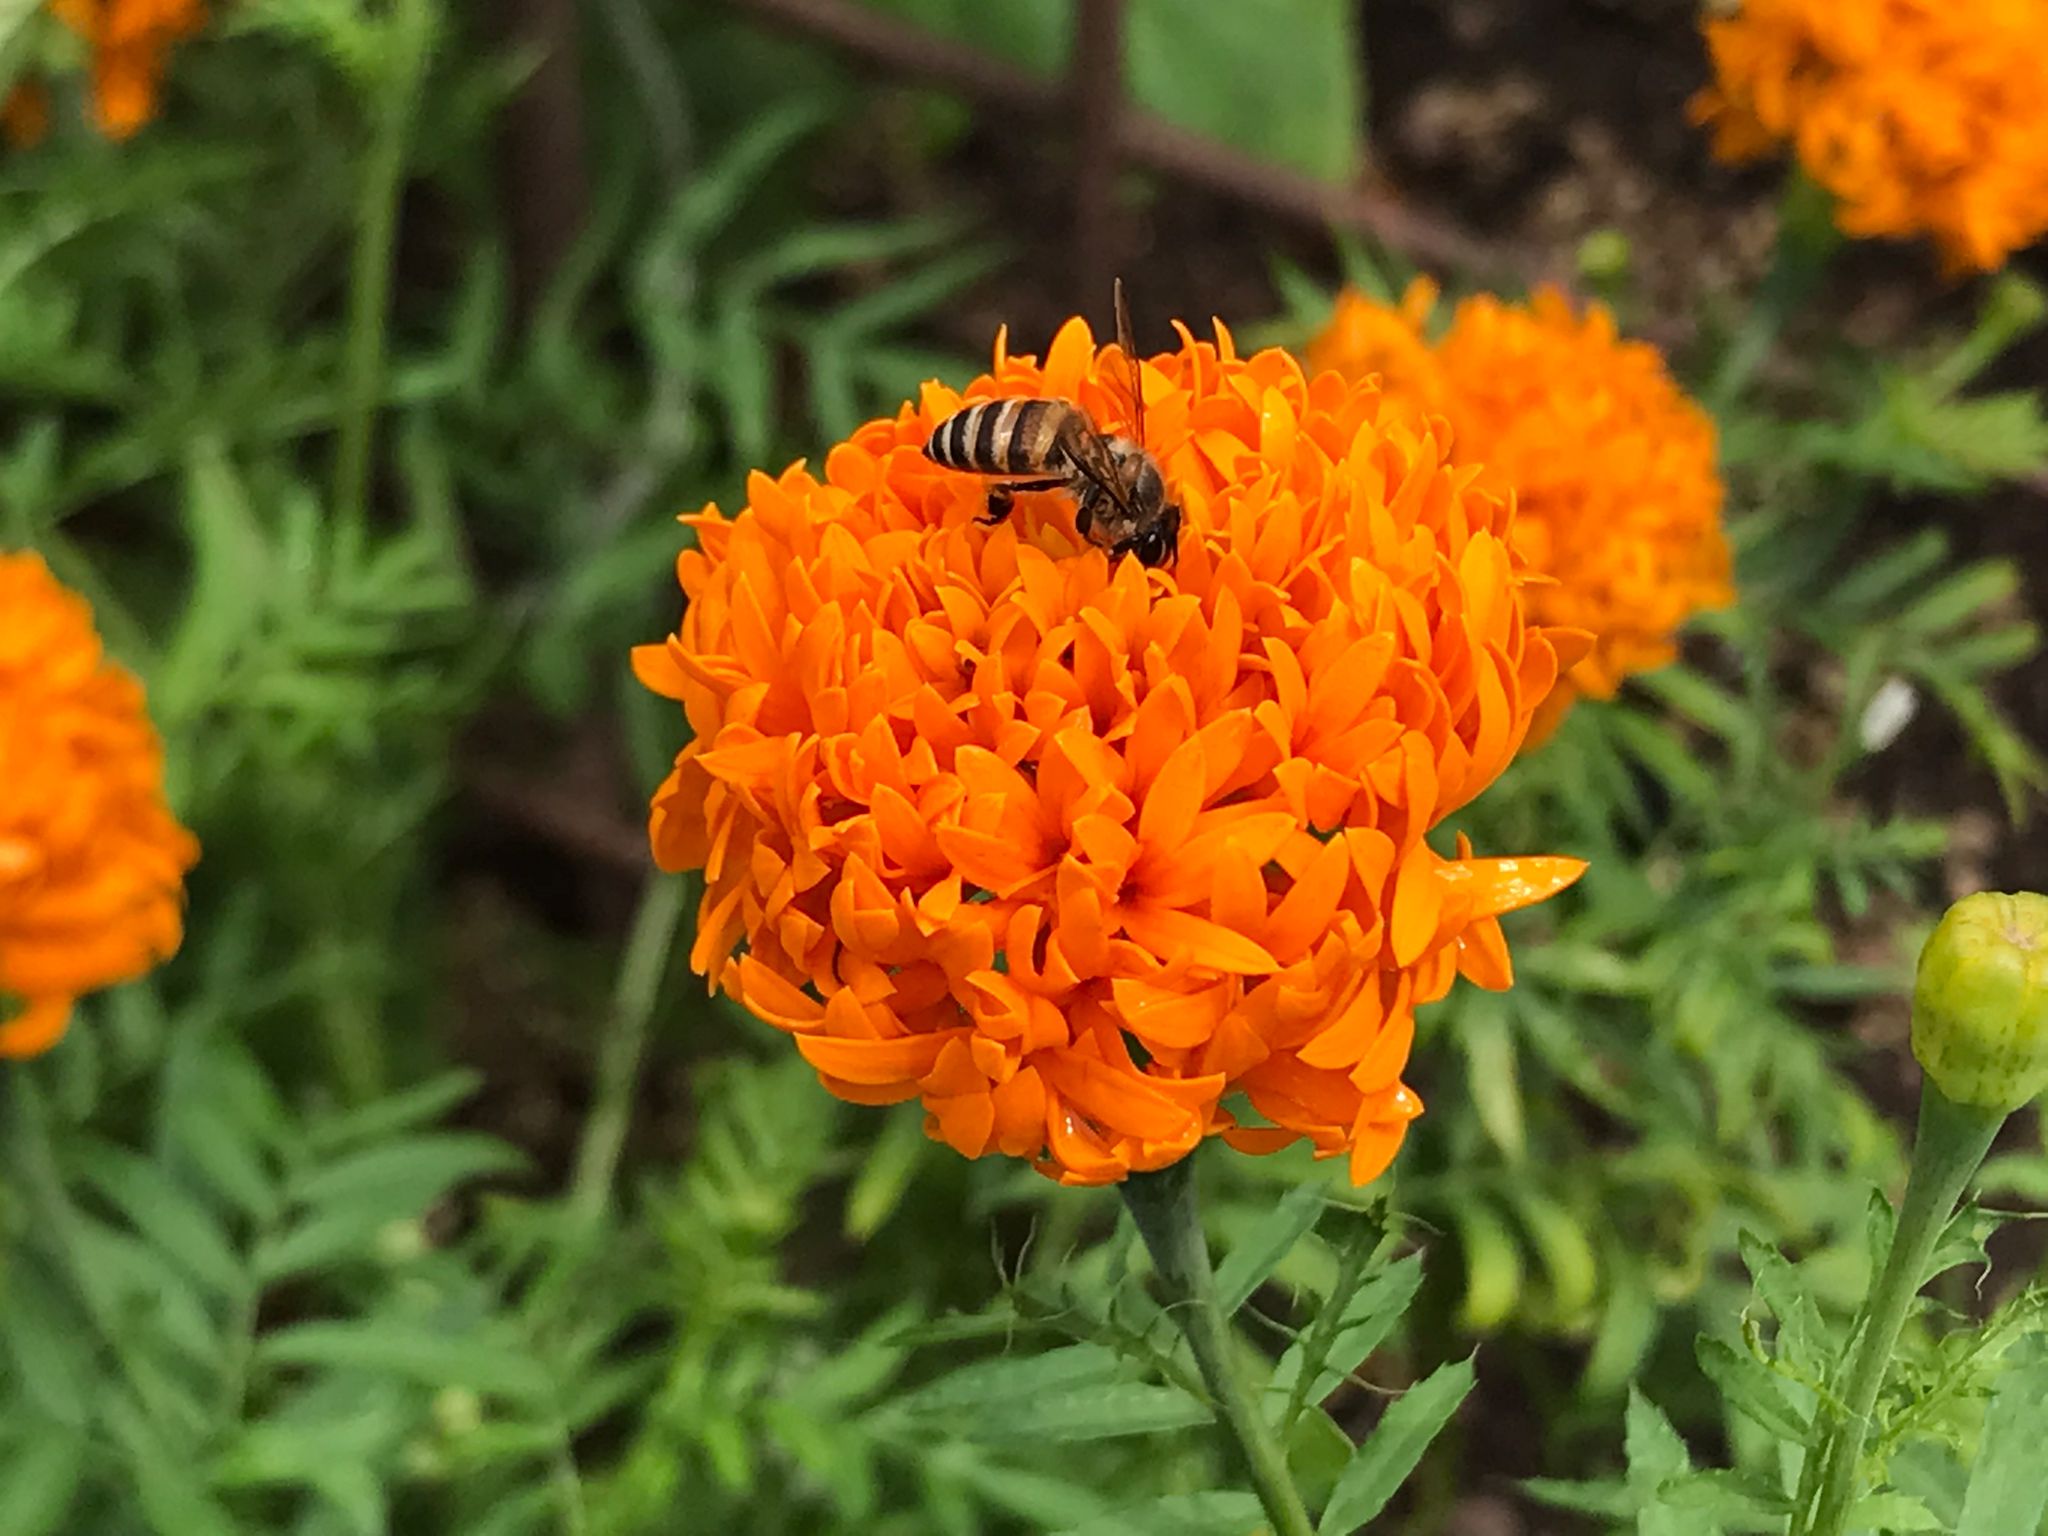 A bee perched on a flower